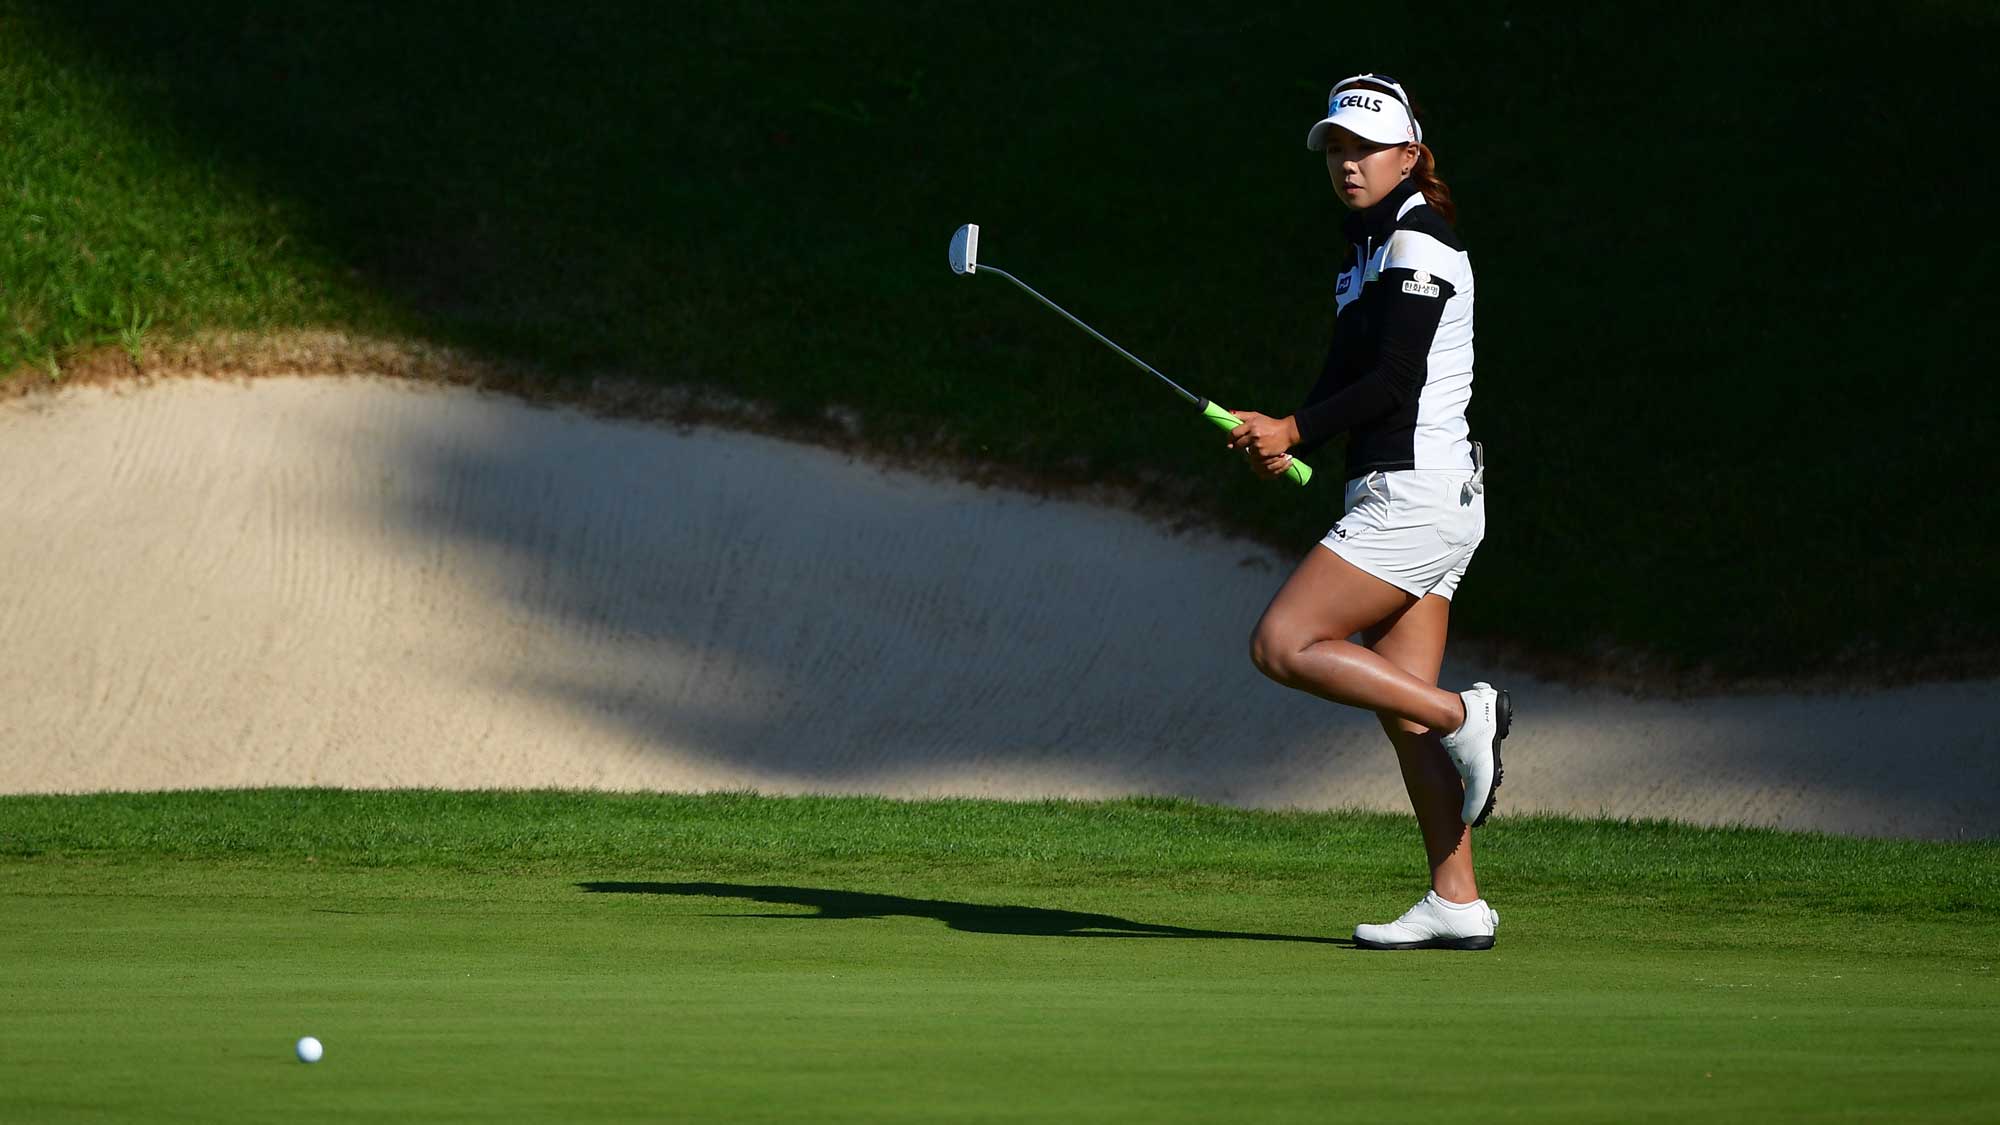 Jenny Shin of Korea reacts to a putt during the third round of The Evian Championship